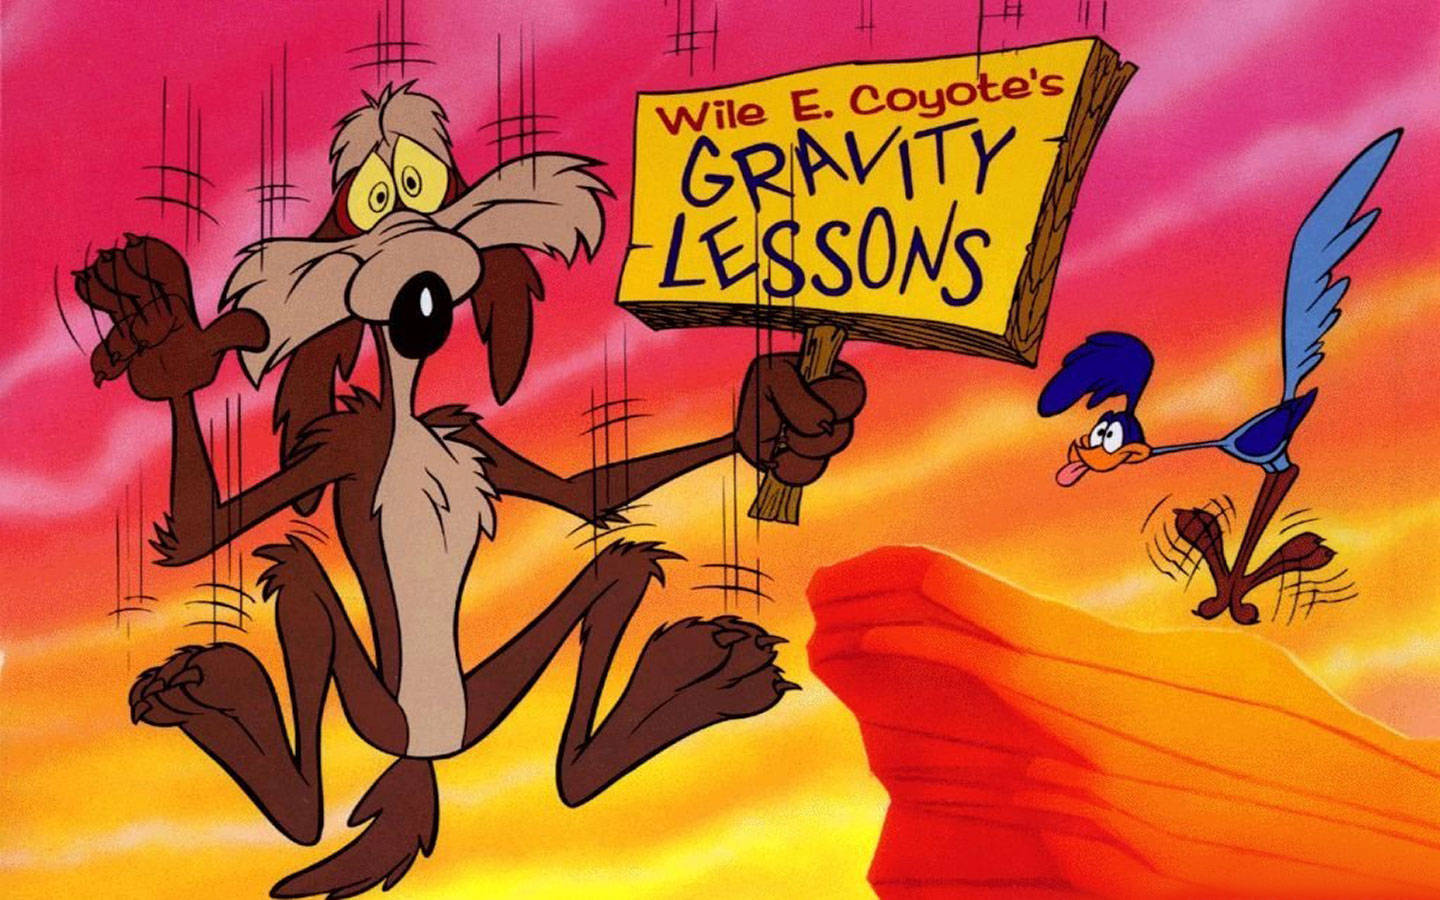 Wilee Coyote Gravity Lessons Banner: Wile E Coyote Gravitationslektioner Banner. Wallpaper